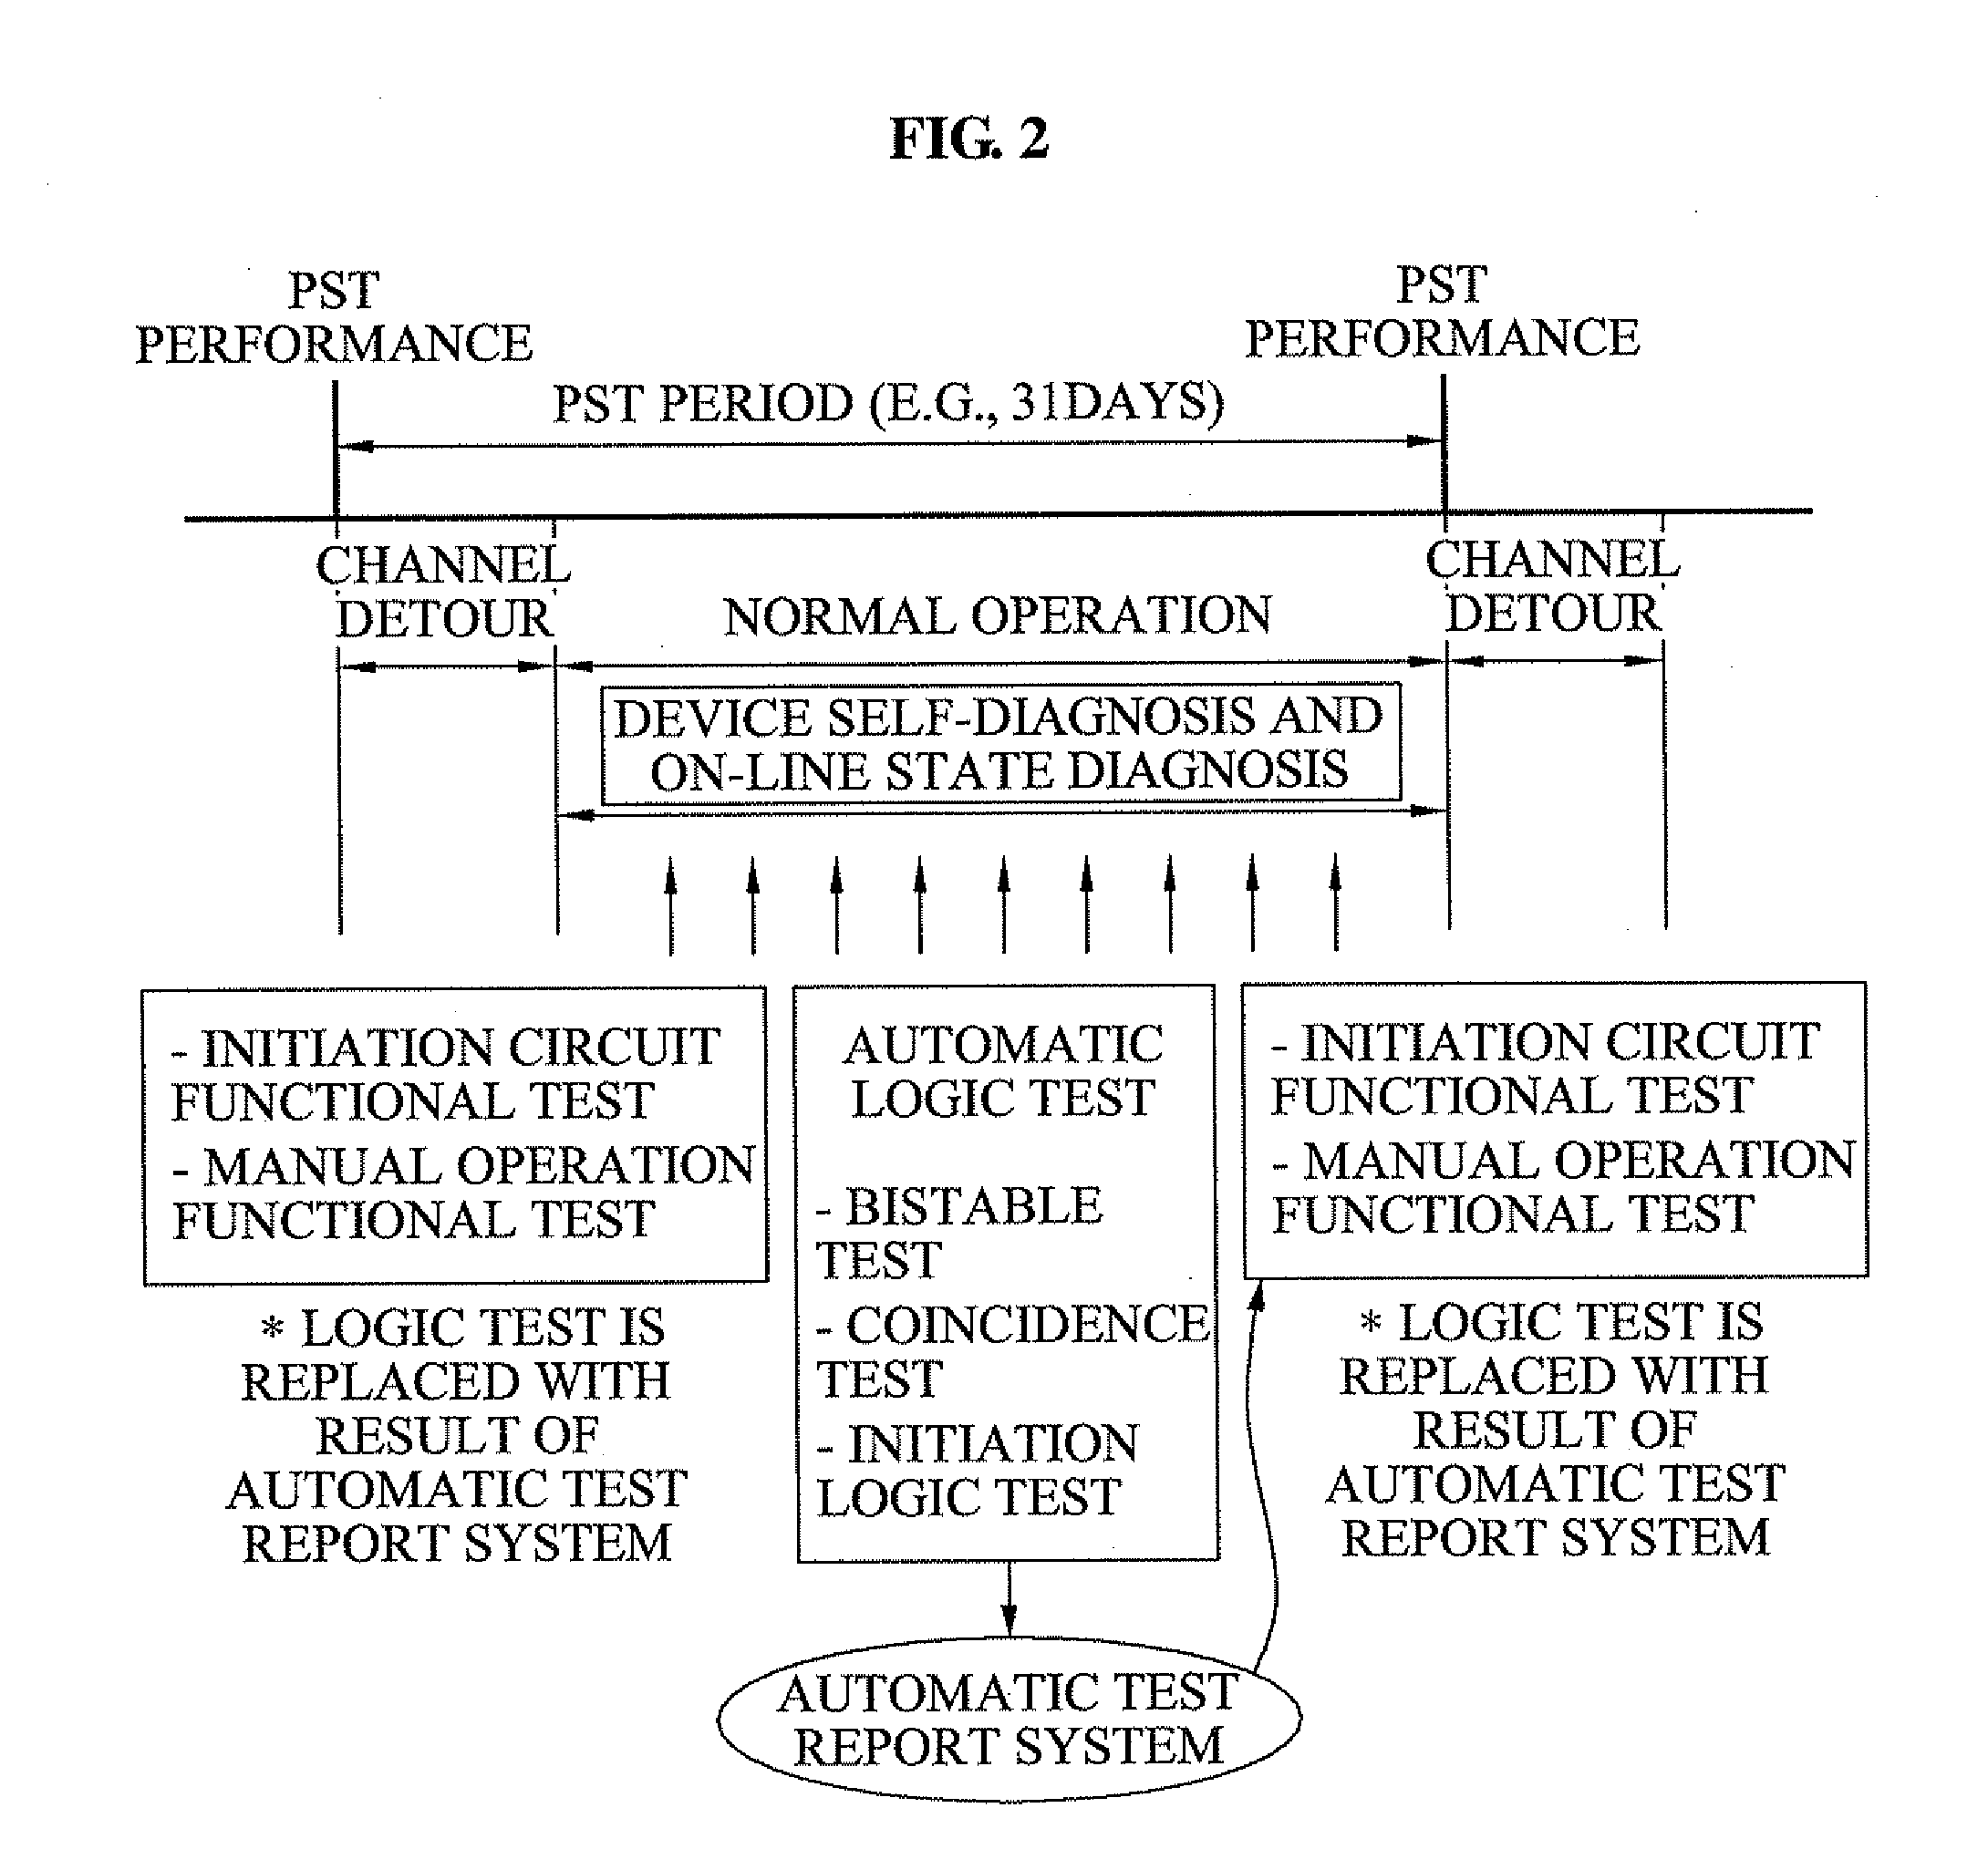 Automated periodic surveillance testing method and apparatus in digital reactor protection system